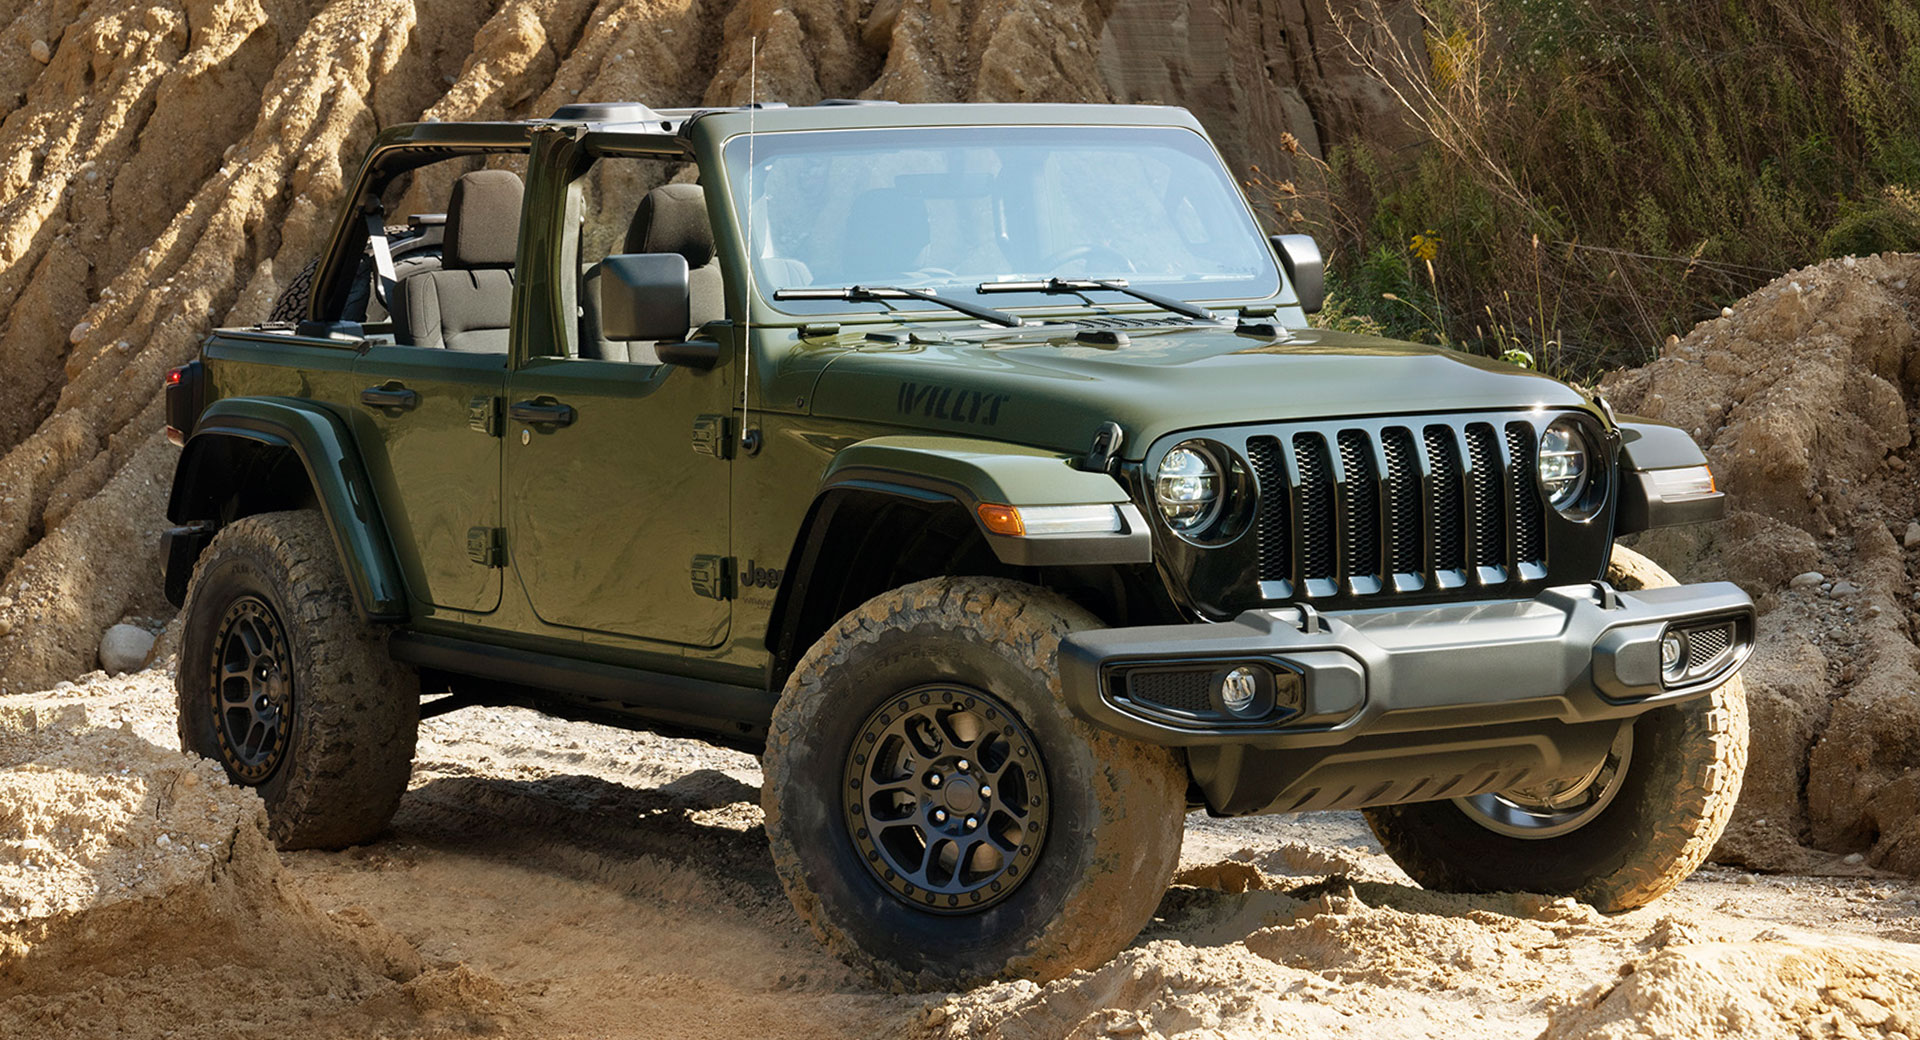 2022 Jeep Wrangler Willys Gains Xtreme Recon Package With 35-Inch Tires |  Carscoops